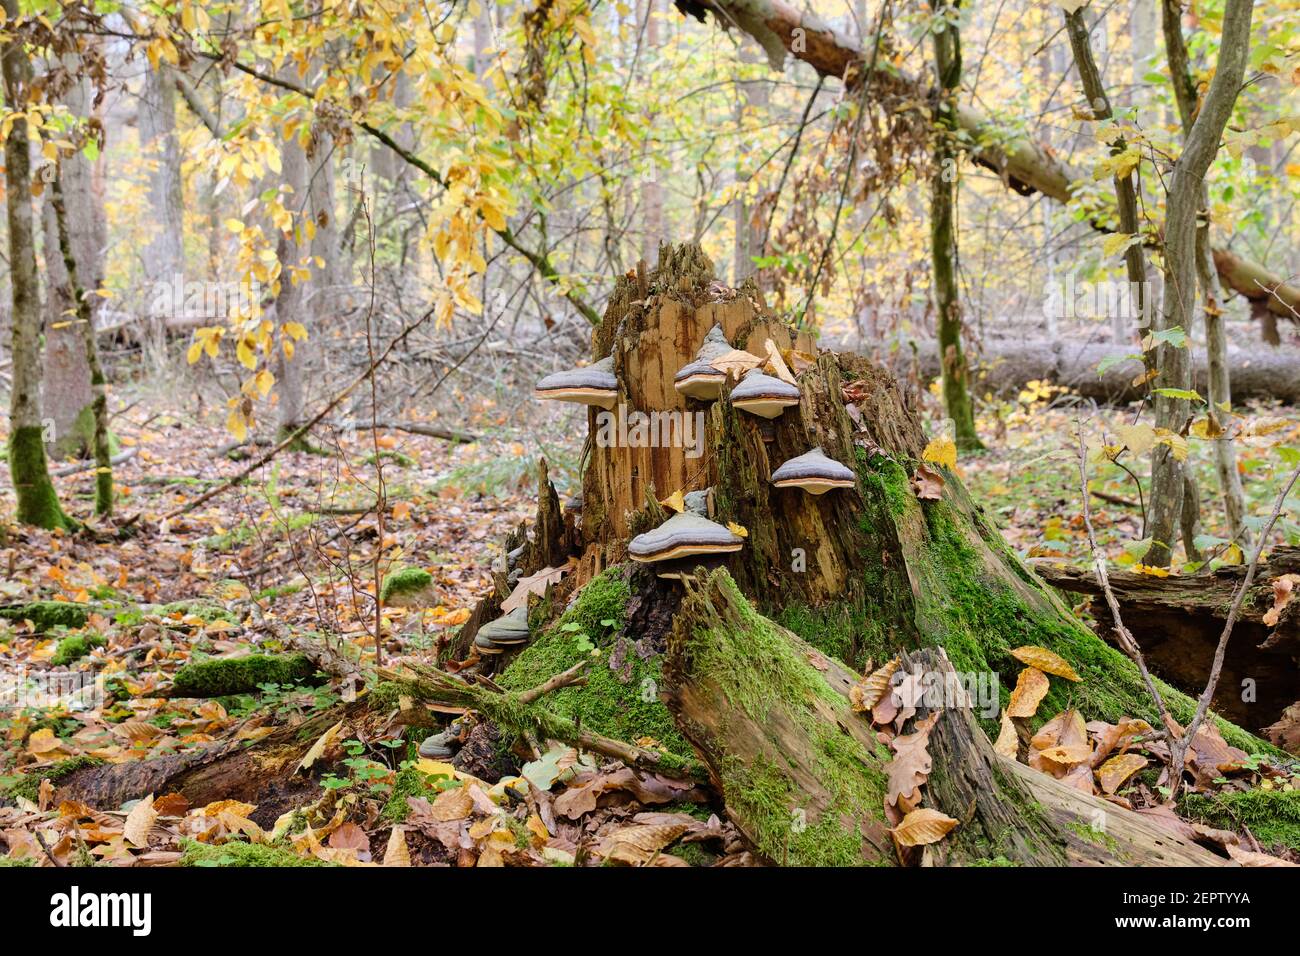 Party declined broken spruce tree stump with some polypore fungi, Bialowieza Forest, Poland, Europe Stock Photo